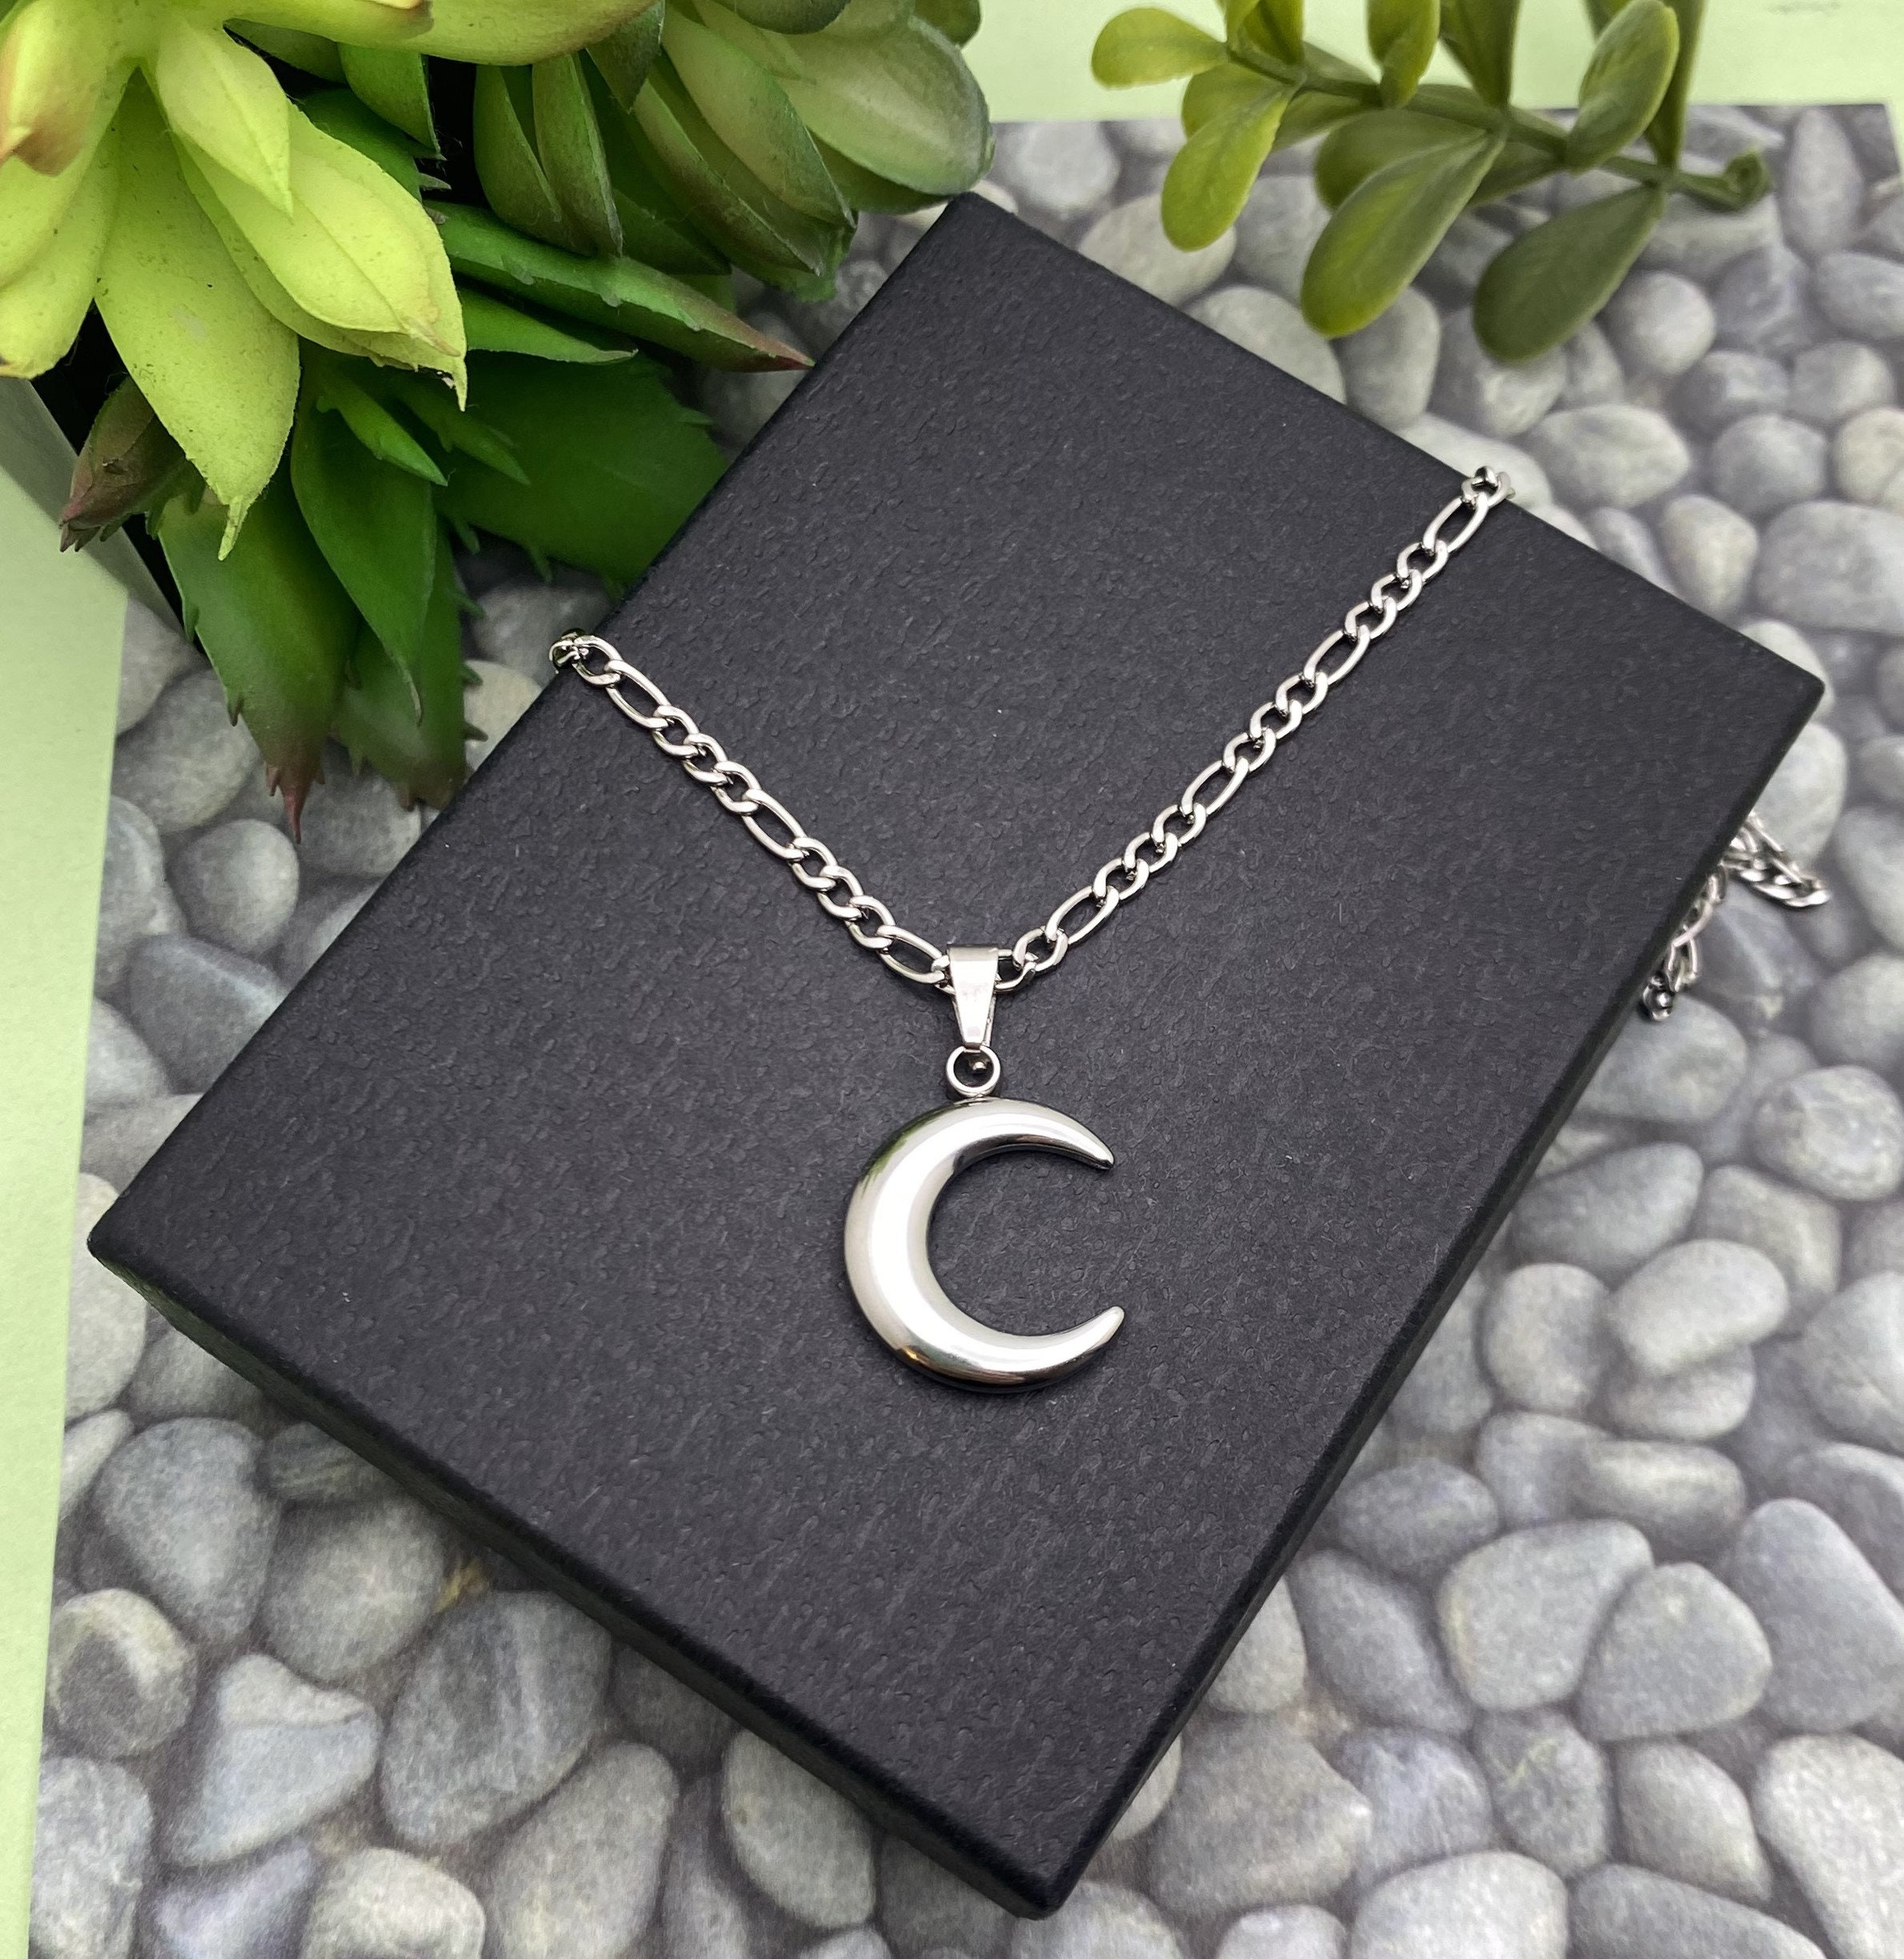 NUEAYMS Resin Cat Eye Moon Necklace Black/White Moon Pendant Necklace  Jewelry New Chinese Style Simple Clavicle Chain Women Men | Amazon.com